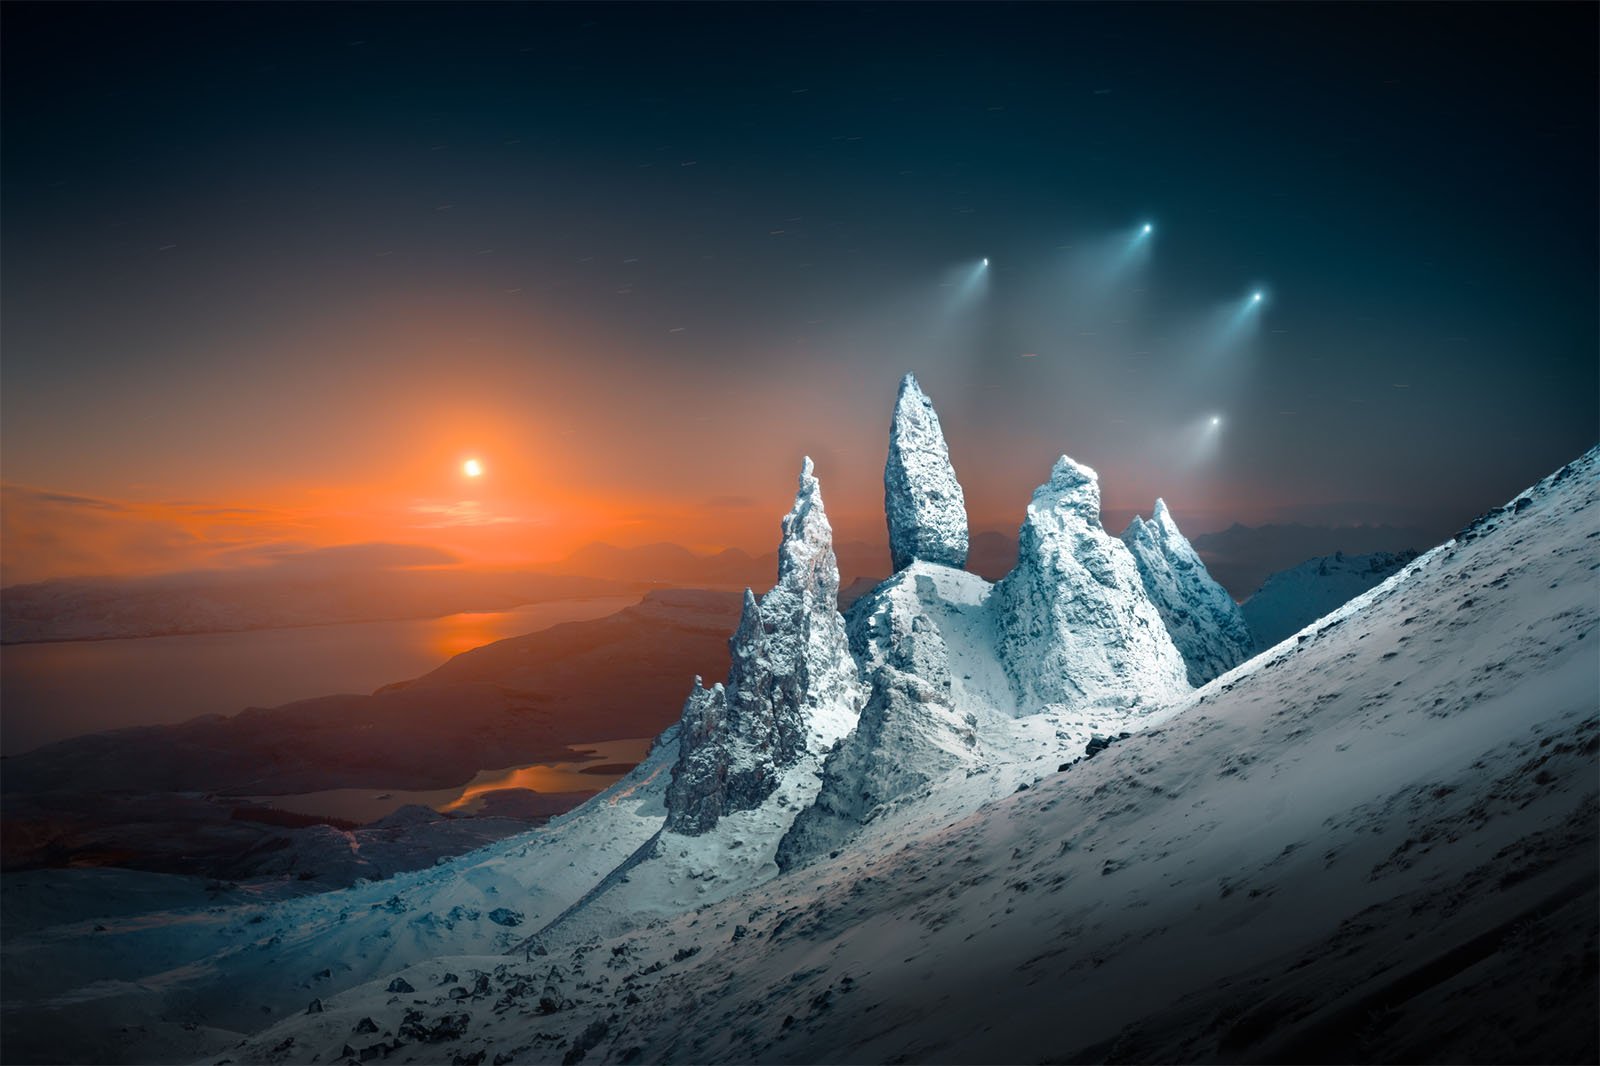 A stunning landscape featuring sharp, snowy mountain peaks under a night sky with a bright orange sun setting on the horizon and three comets streaking through the sky above a serene lake.